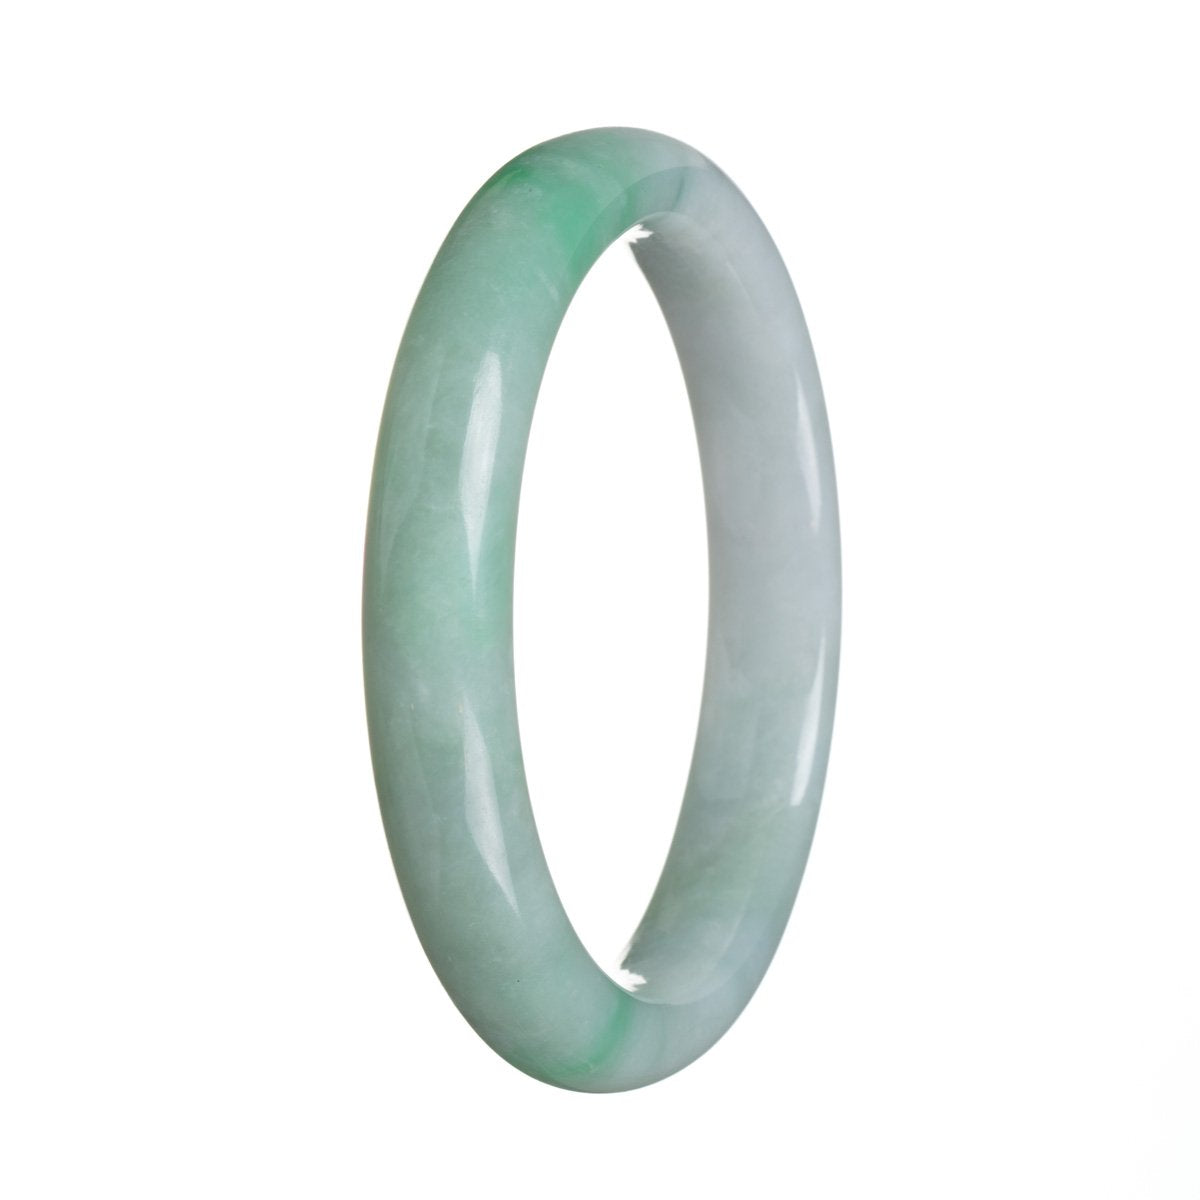 A close-up photo of a beautiful, apple green jadeite bangle bracelet. The bracelet is certified Type A and has a semi-round shape, measuring 63mm in diameter. It is a stunning piece of jewelry from MAYS™.